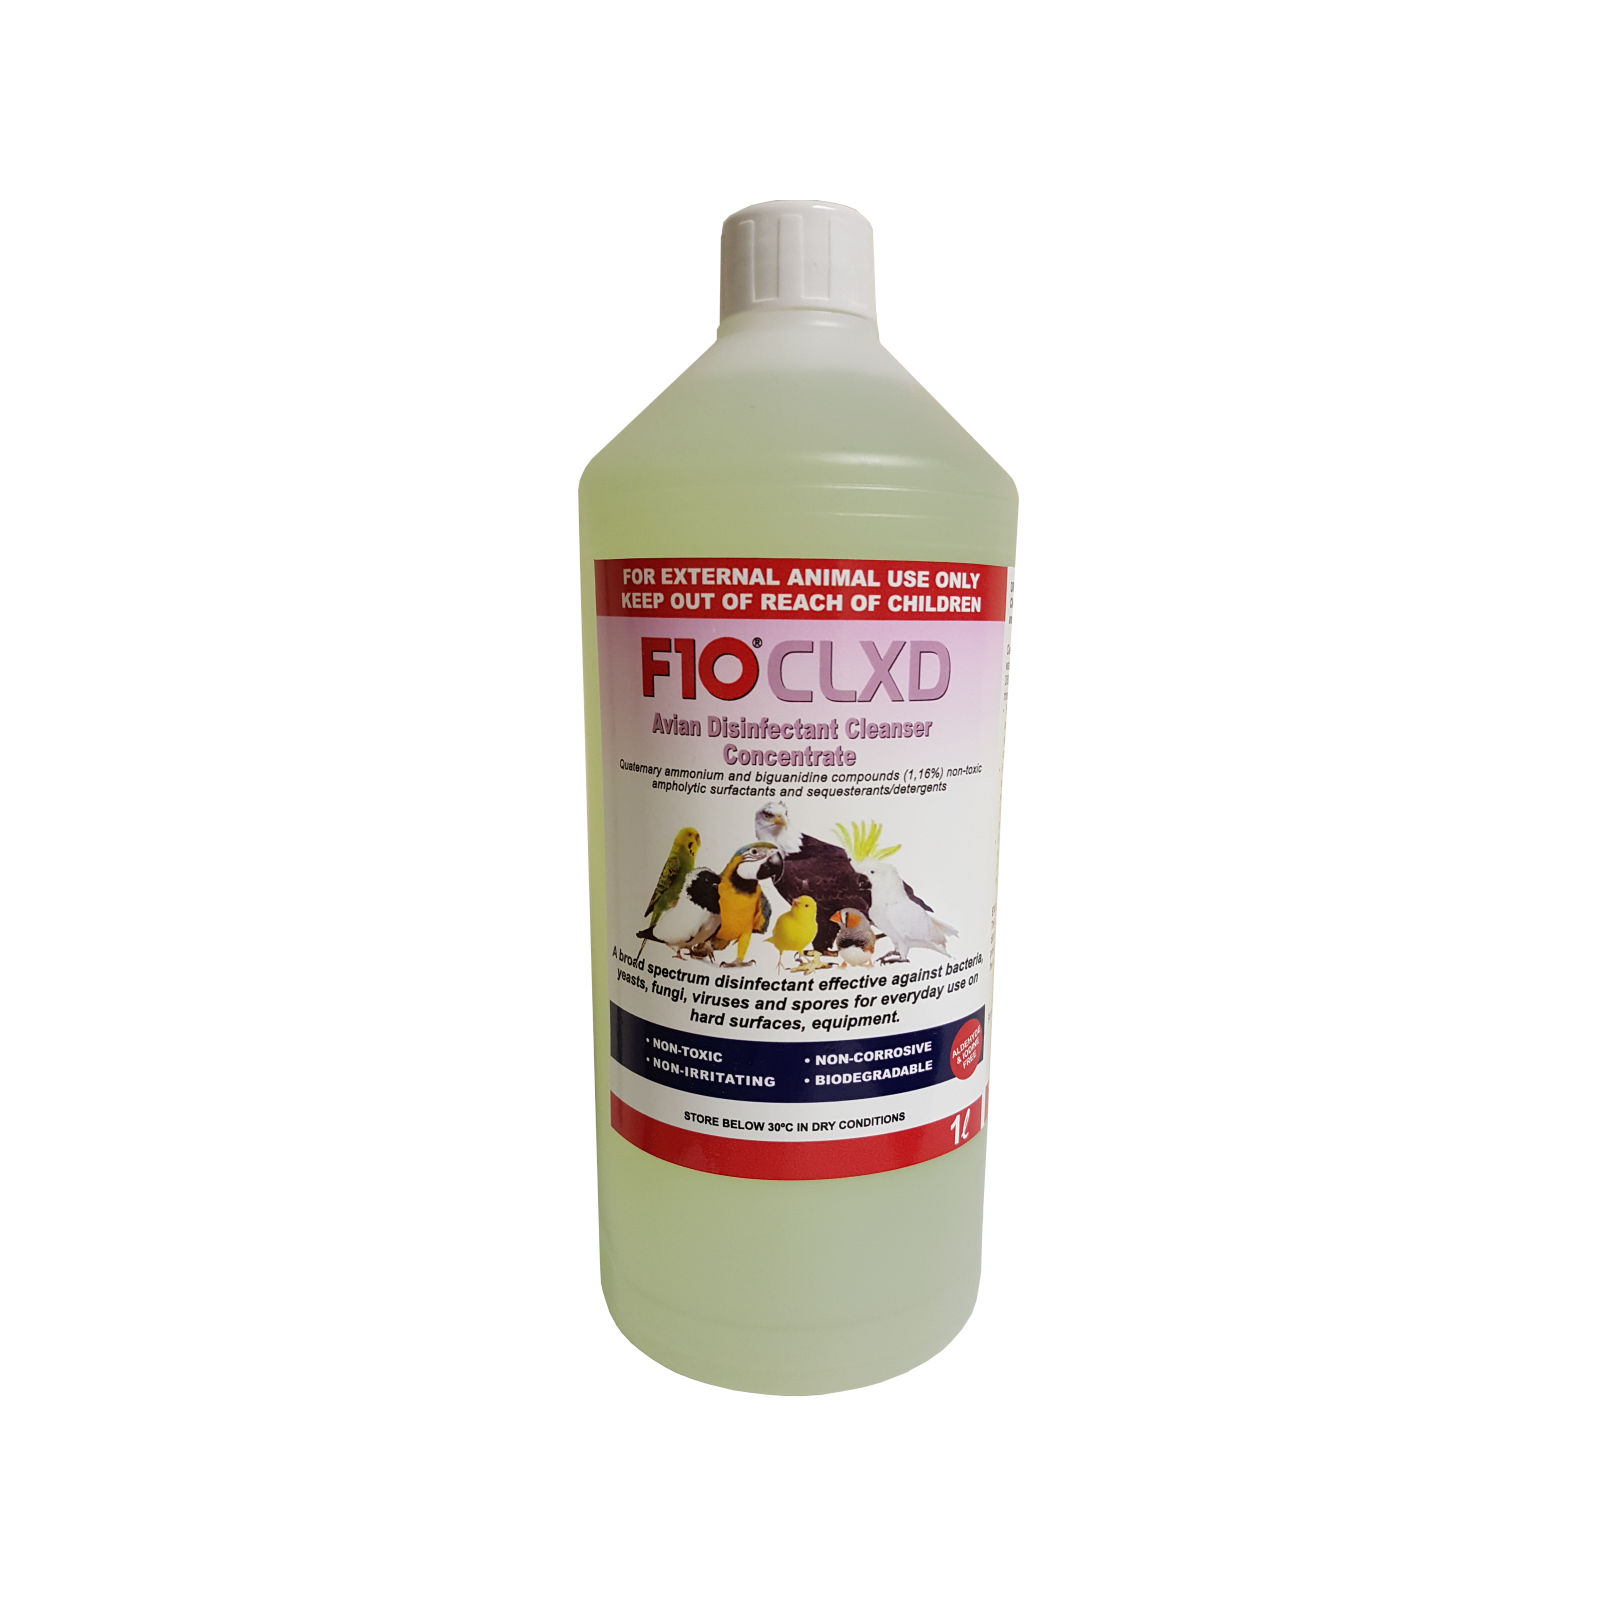 A 1 litre bottle of F10CLXD Avian Disinfectant Cleanser Concentrate